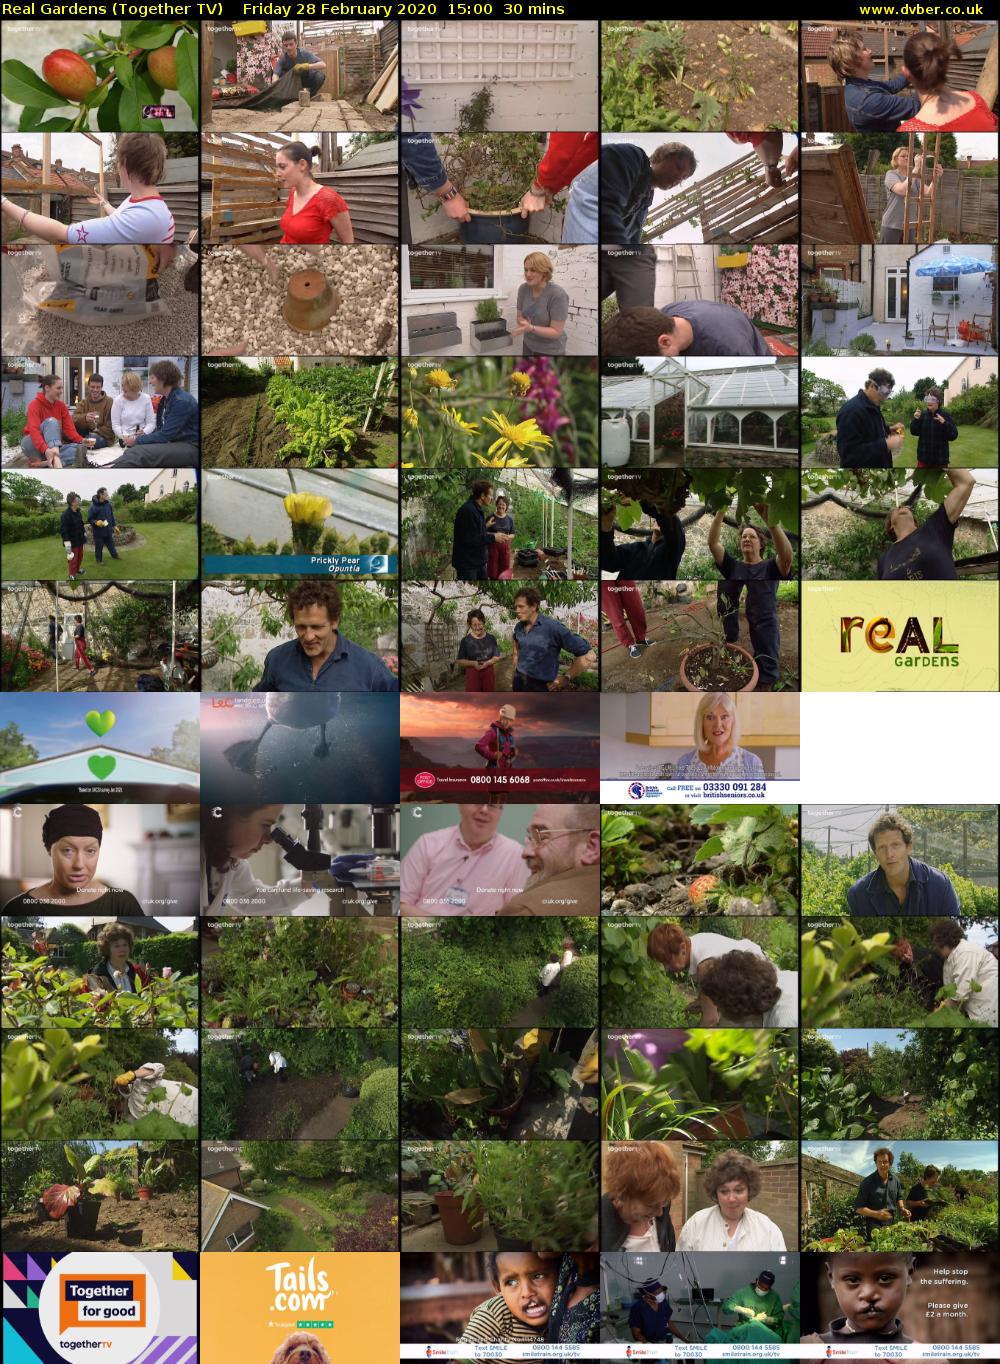 Real Gardens (Together TV) Friday 28 February 2020 15:00 - 15:30